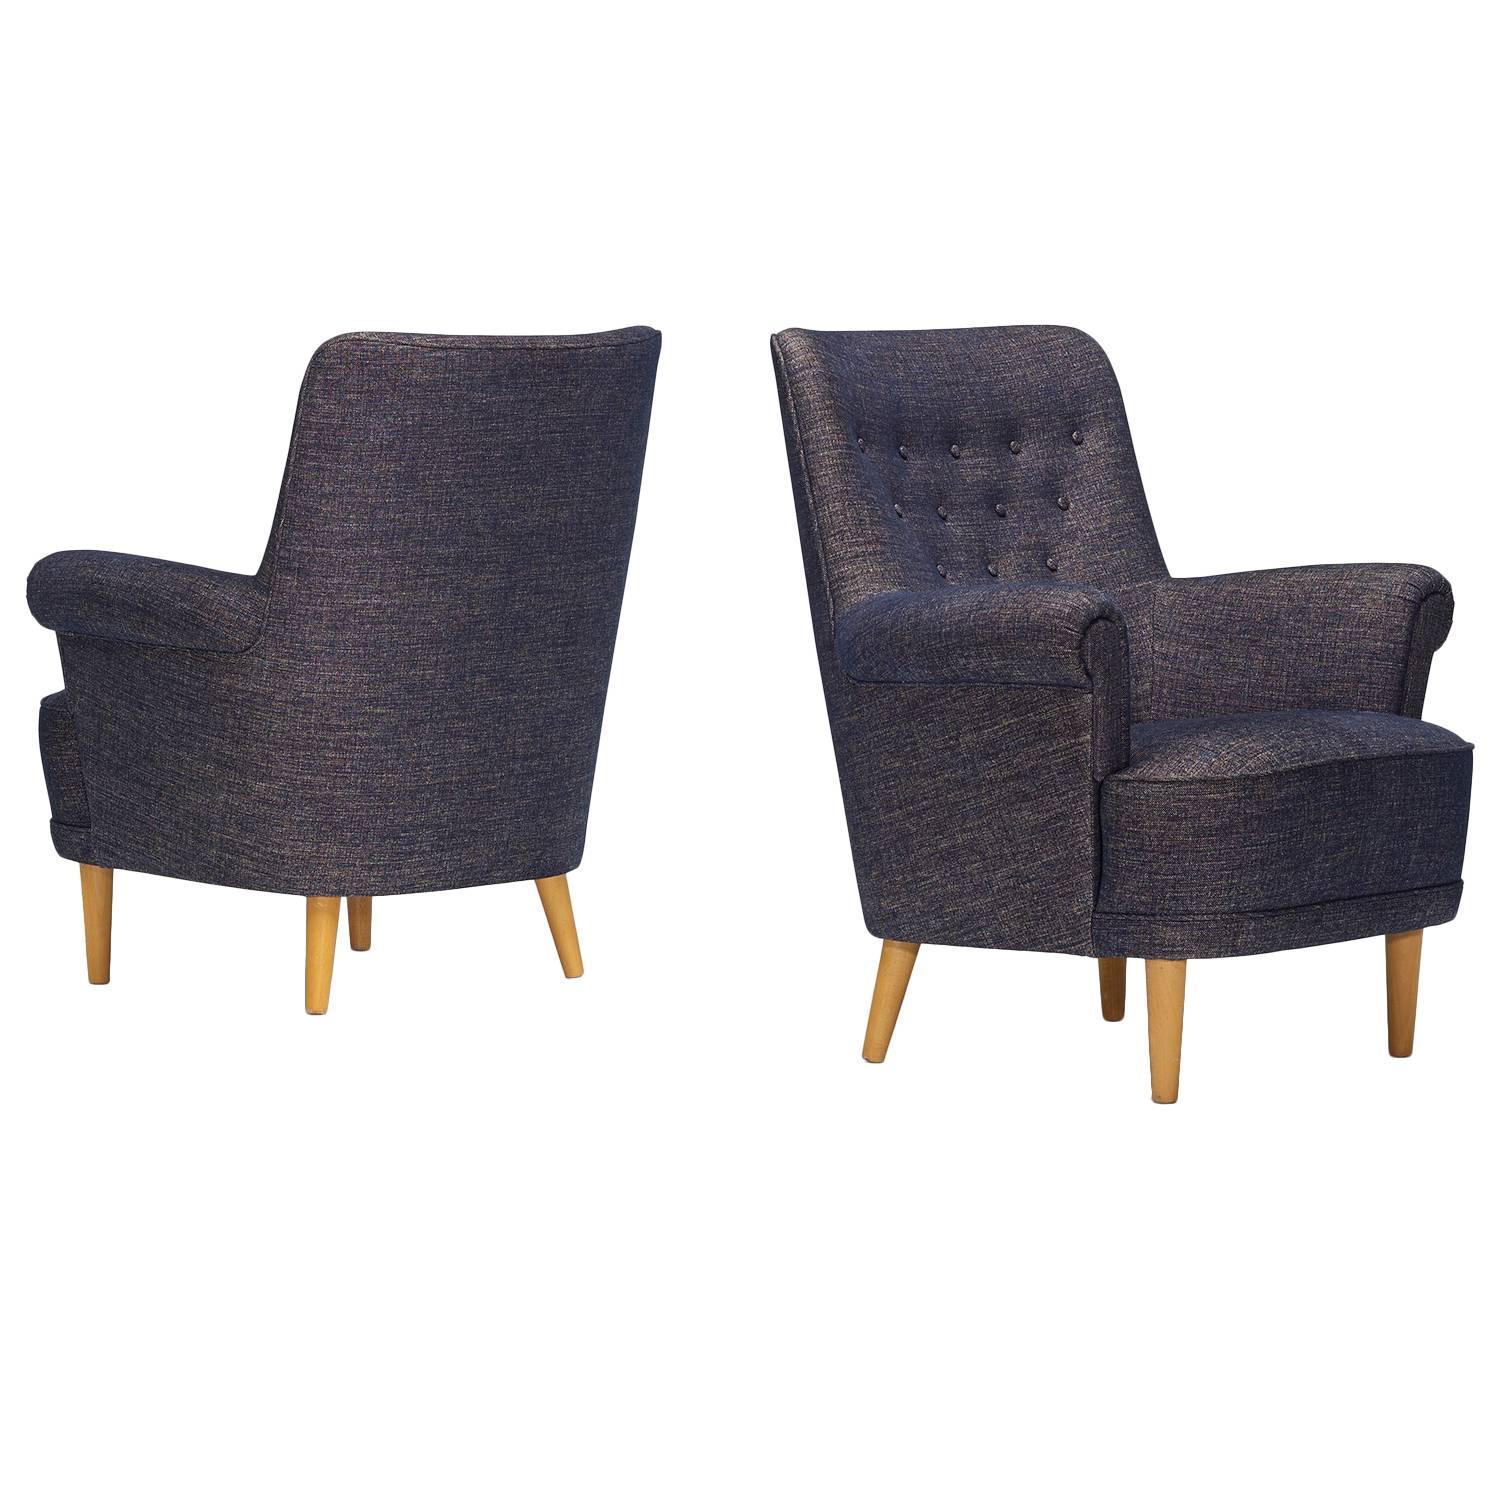 Pair of Lounge Chairs by Carl Malmsten for O.H. SjöGren